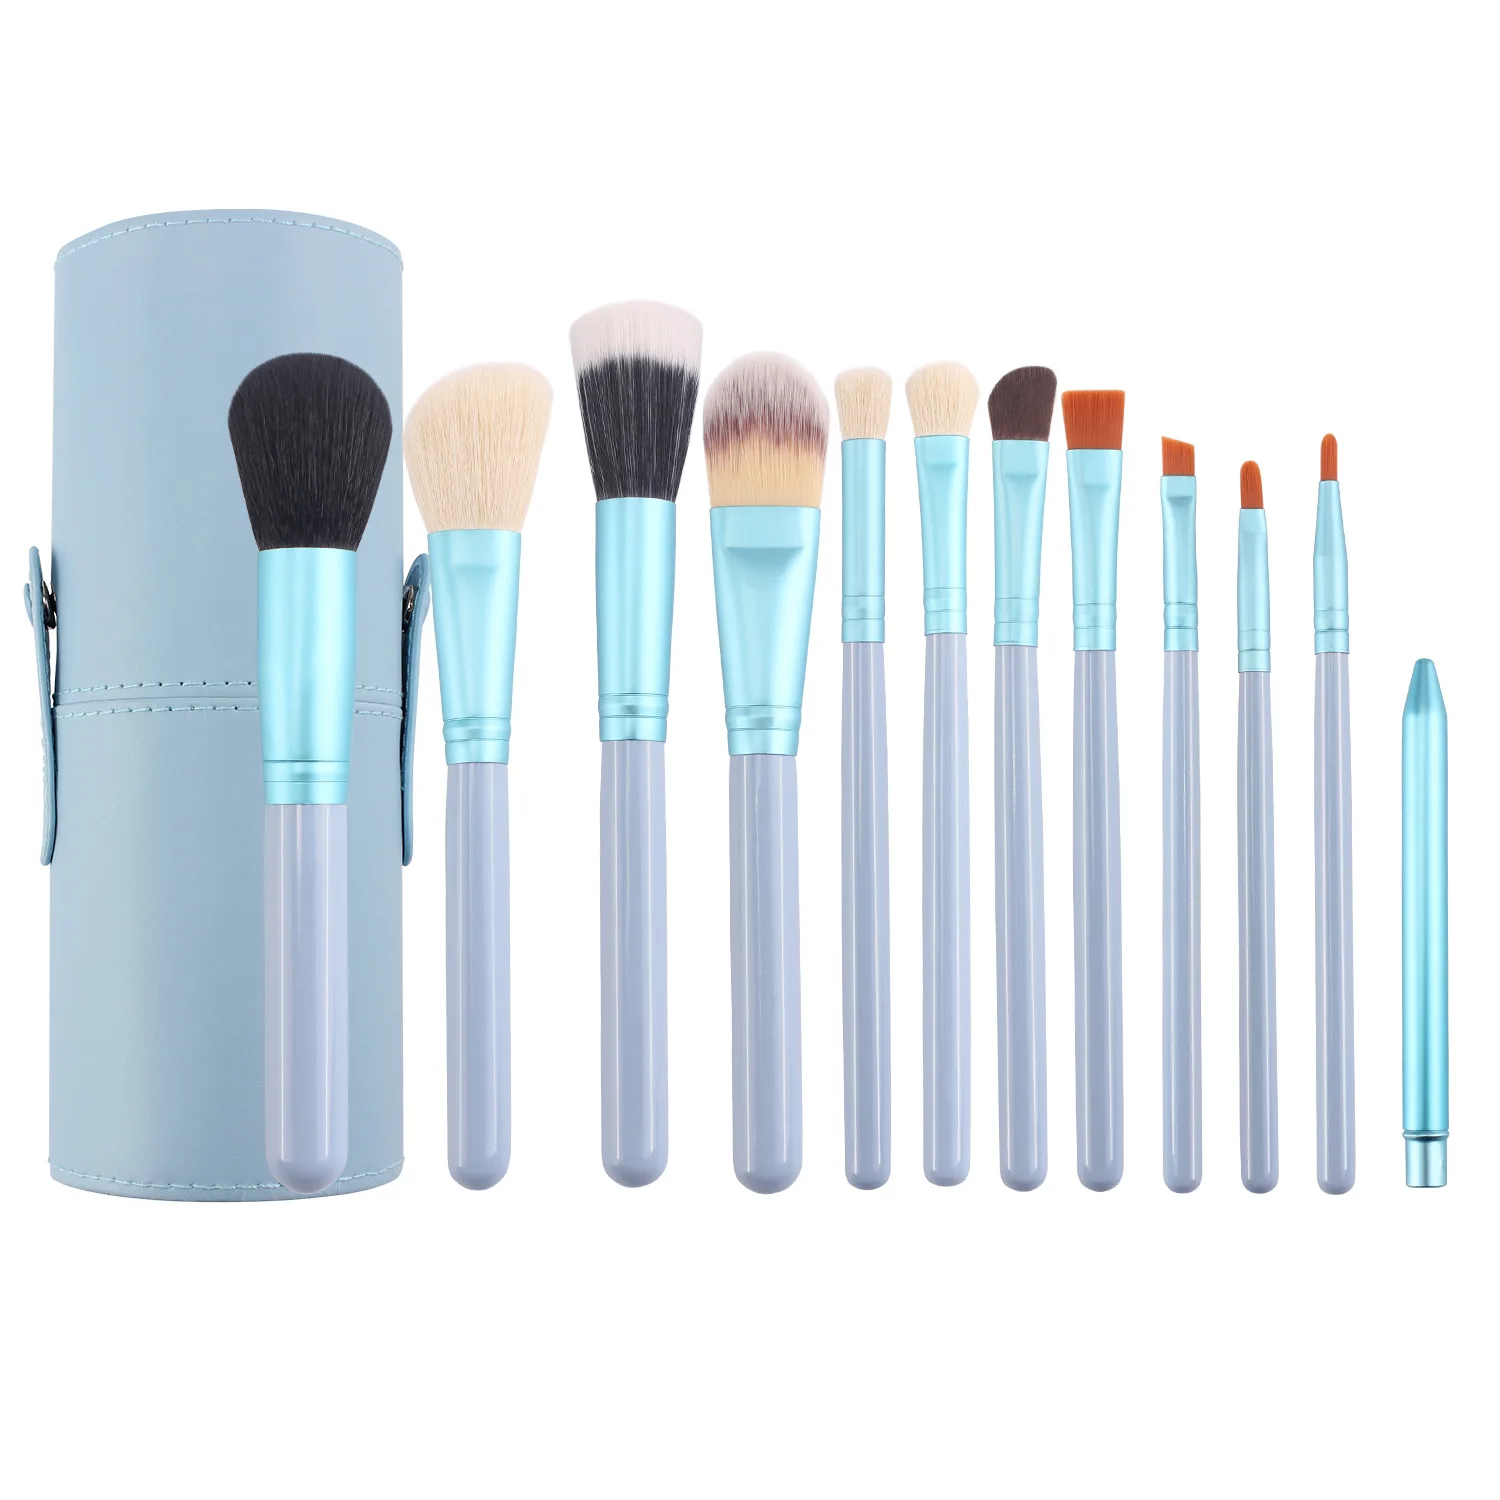 Multi-use 12pcs private label synthetic fibre cosmetic makeup brush set with PU bag case